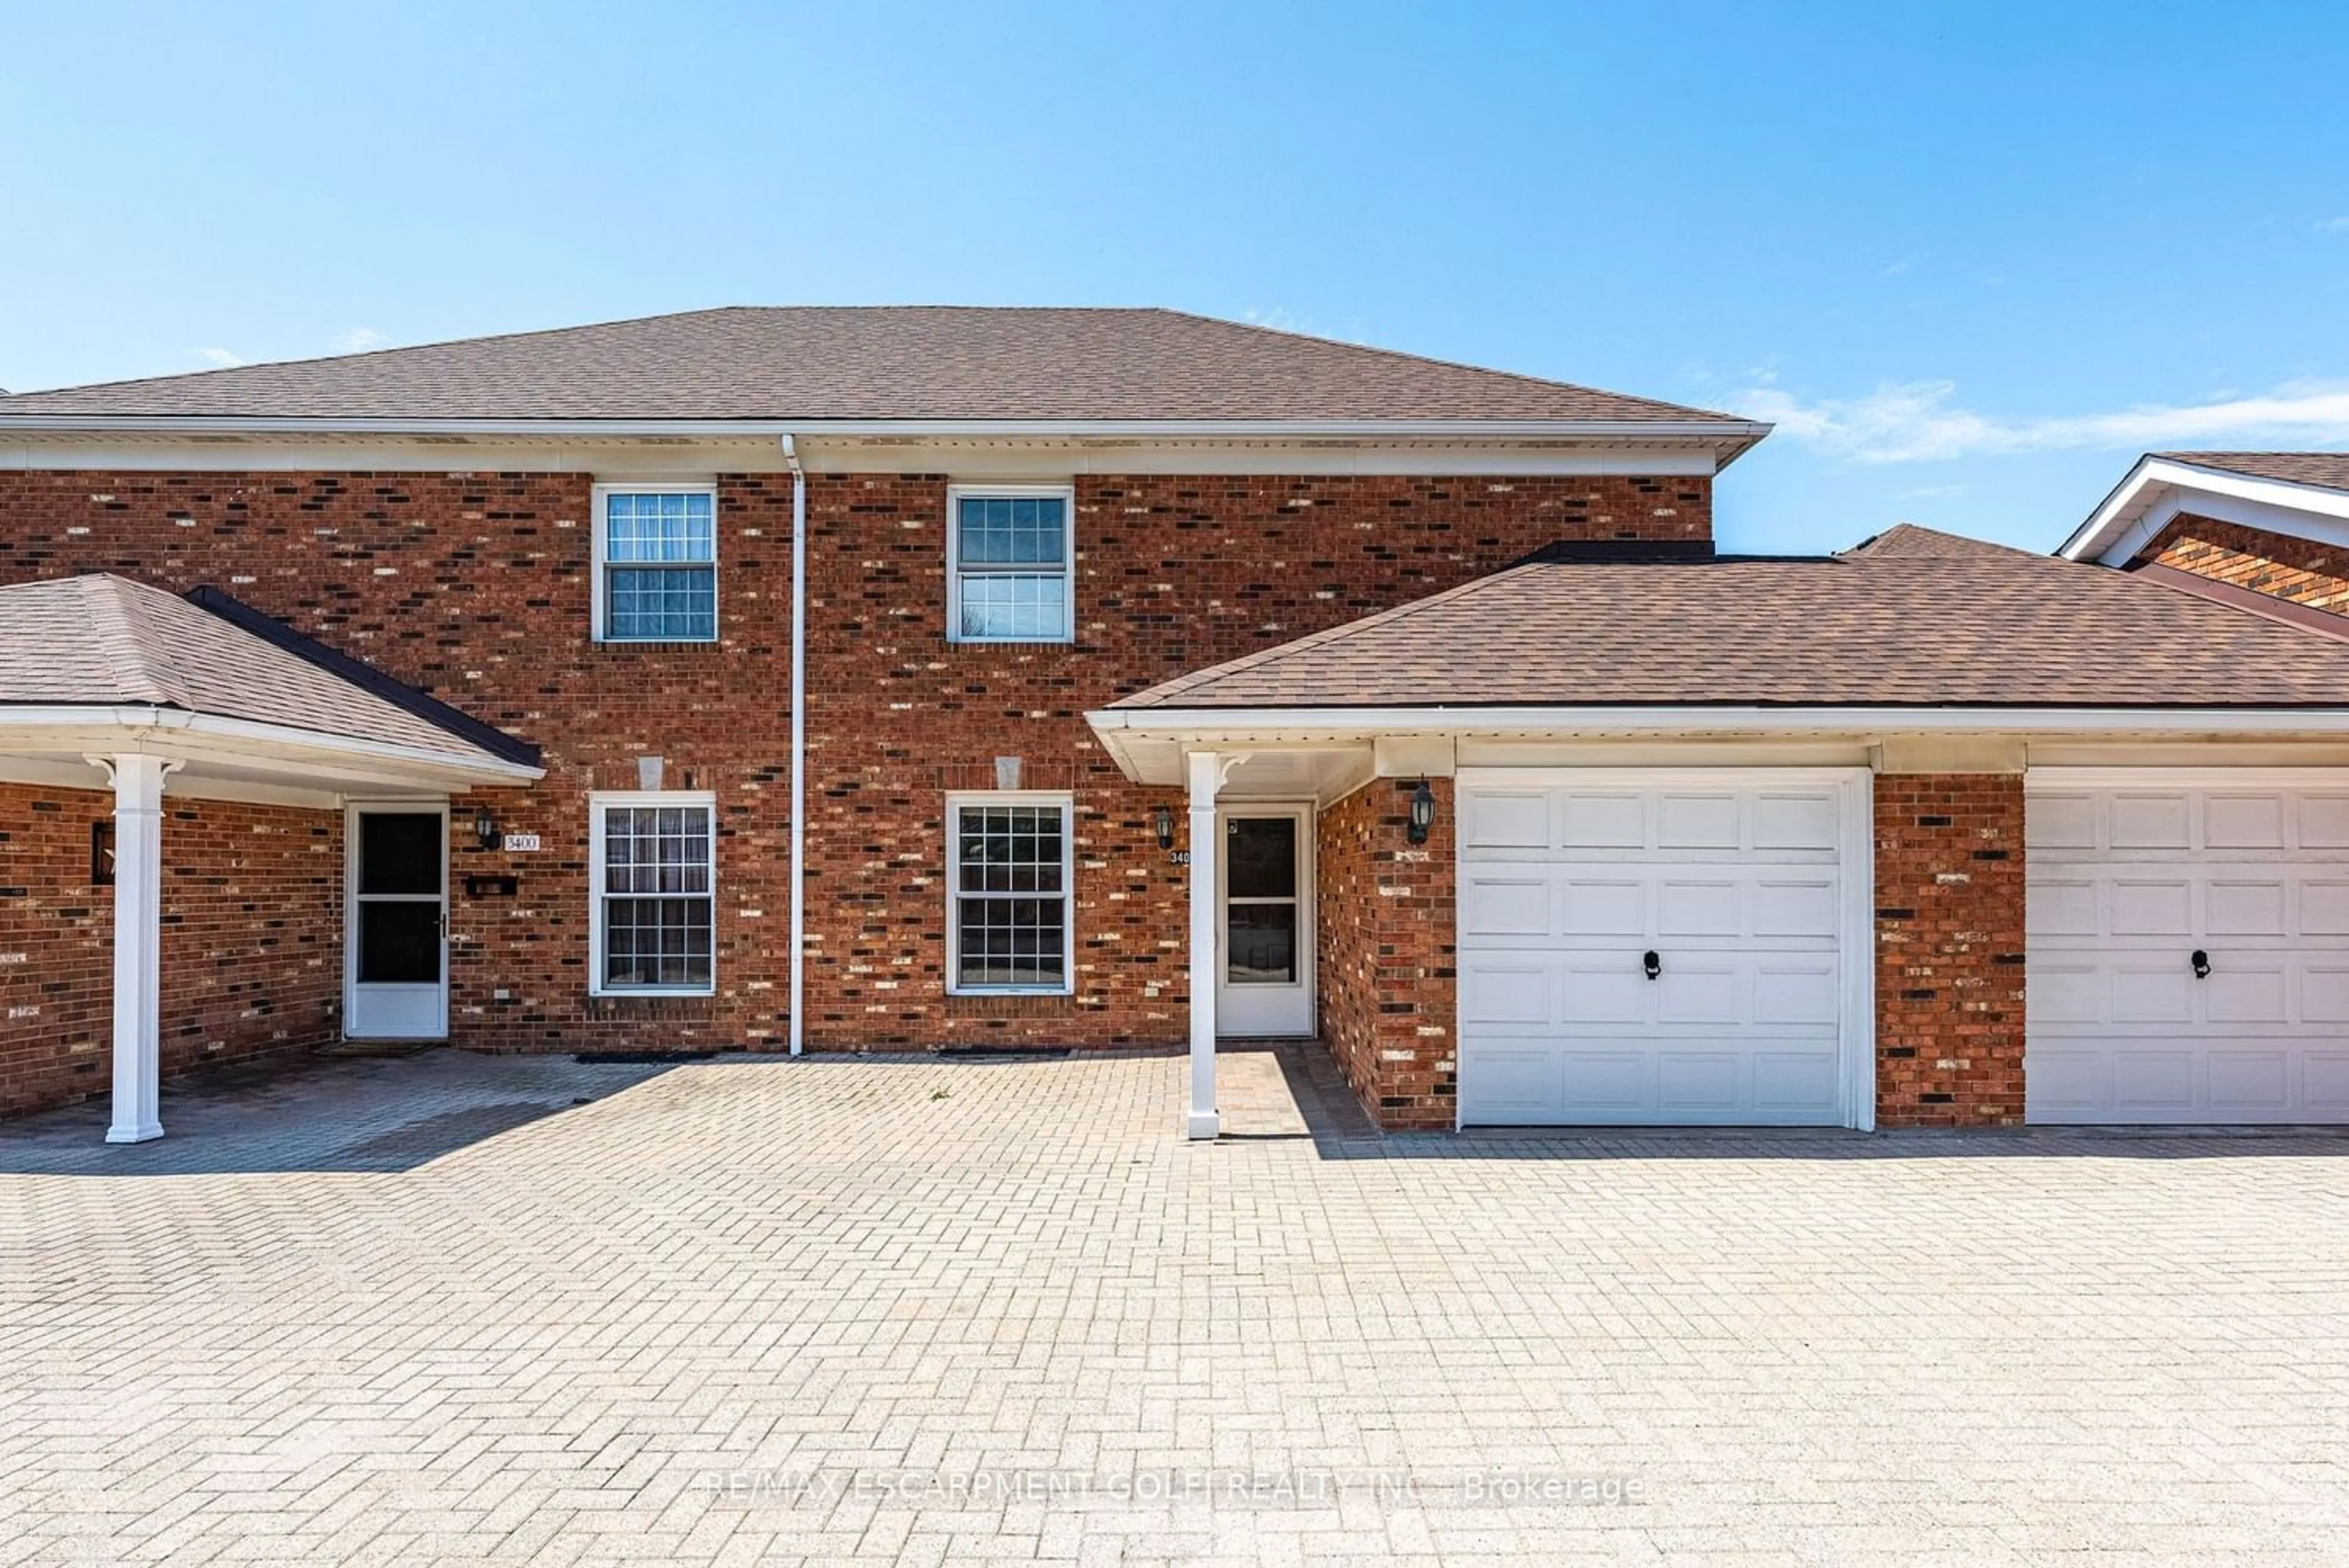 Home with brick exterior material for 3402 Frederick Ave #8, West Lincoln Ontario L0R 2C0